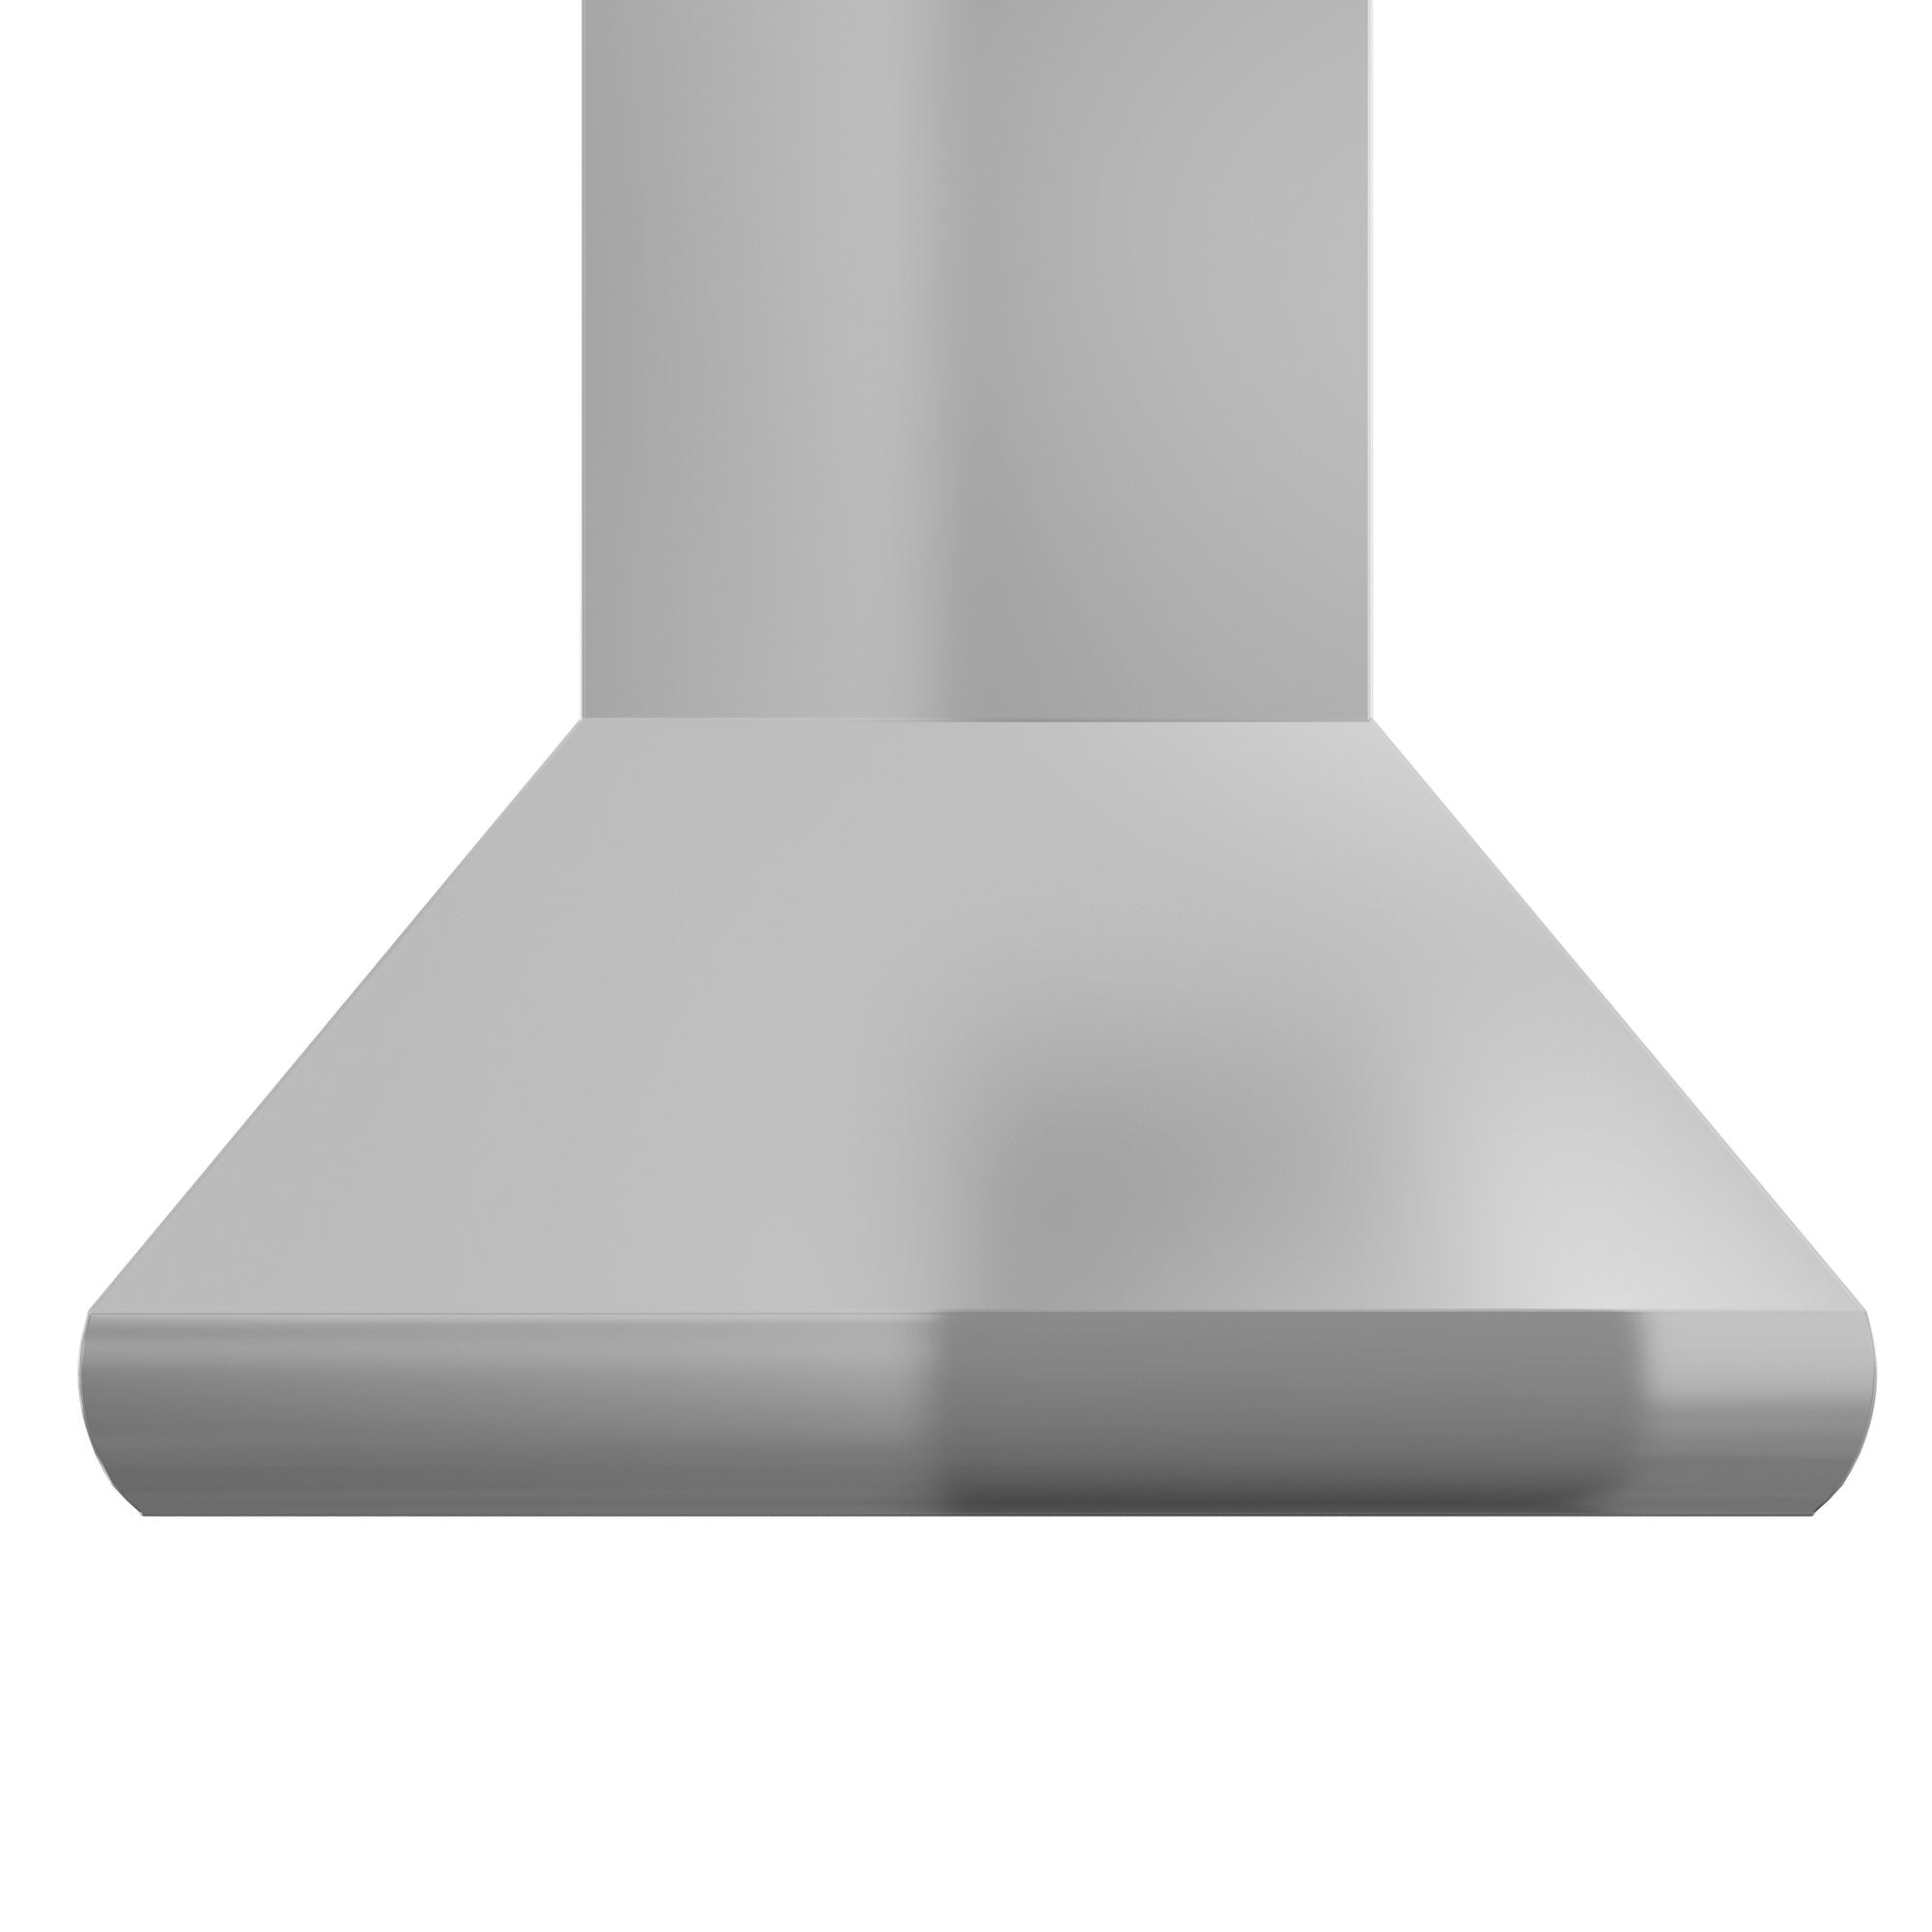 ZLINE Professional Ducted Wall Mount Range Hood in Stainless Steel - 687